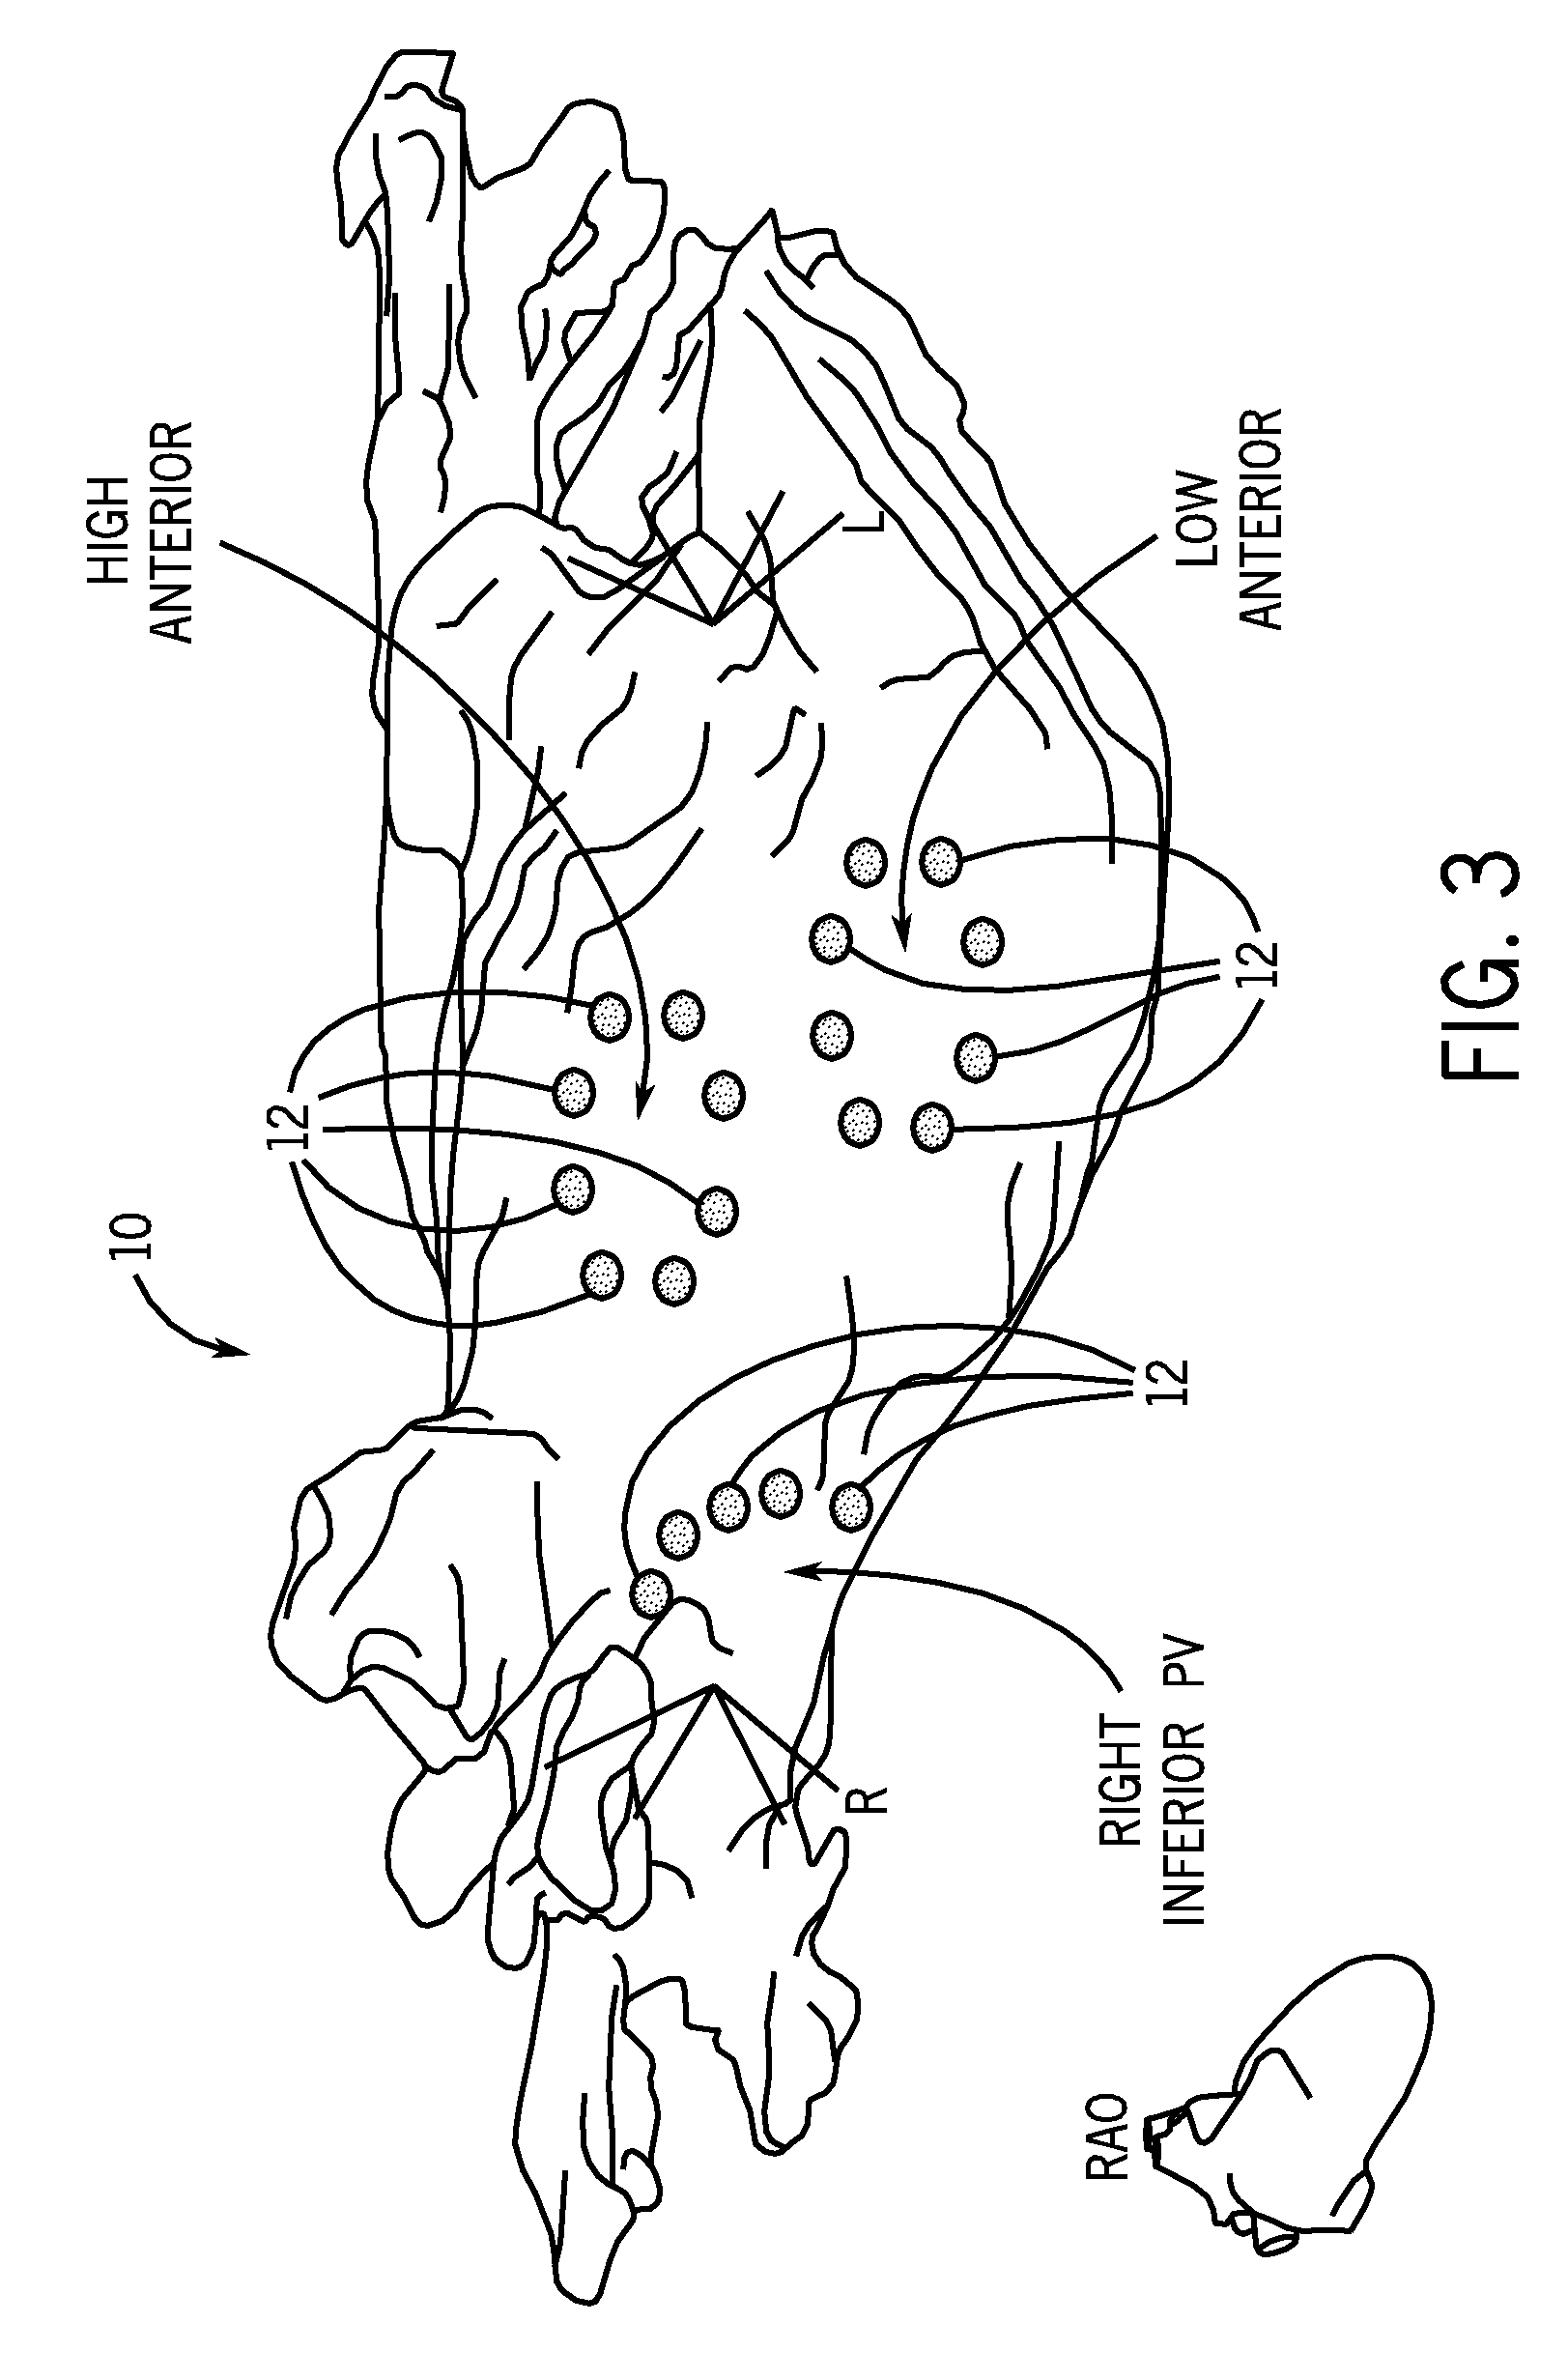 System and method for assessing atrial electrical stability